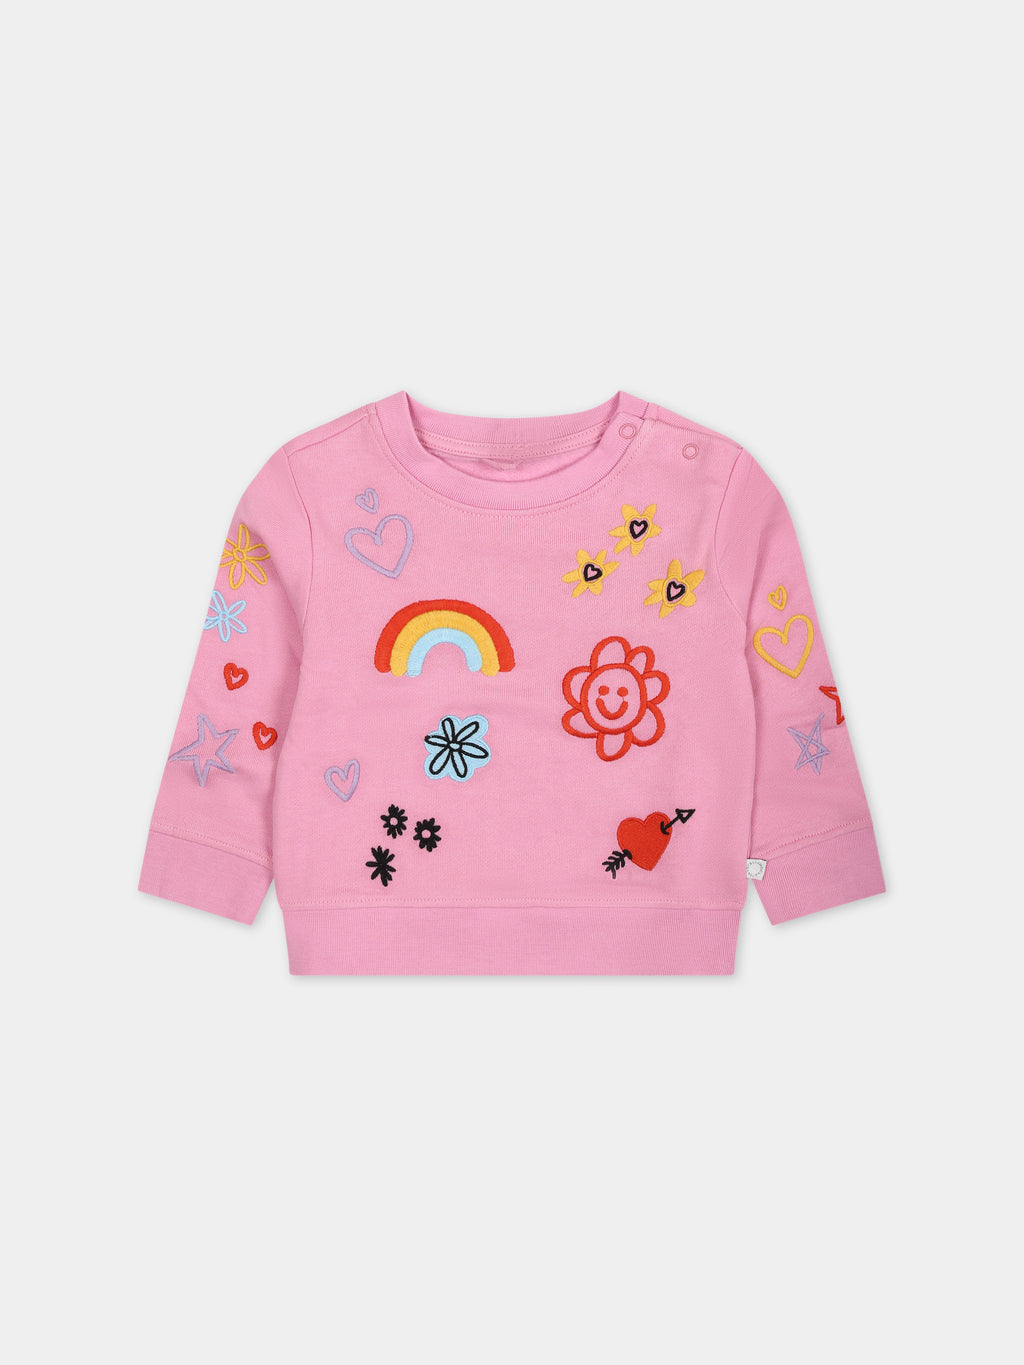 Pink sweatshirt for baby girl with all-over multicolor embroidery